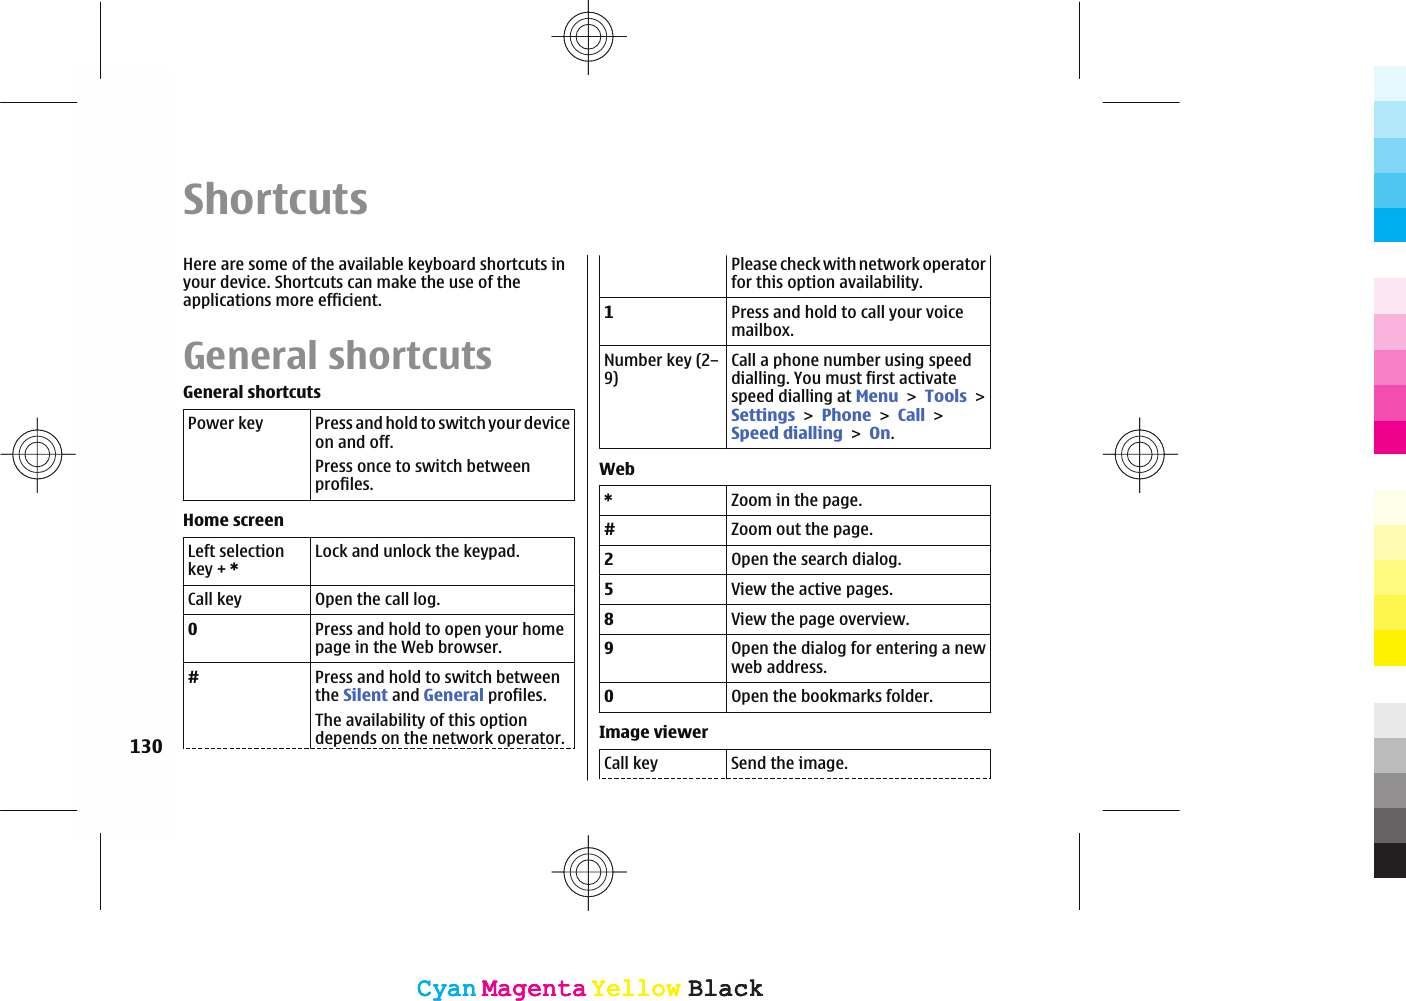 ShortcutsHere are some of the available keyboard shortcuts inyour device. Shortcuts can make the use of theapplications more efficient.General shortcutsGeneral shortcutsPower key Press and hold to switch your deviceon and off.Press once to switch betweenprofiles.Home screenLeft selectionkey + *Lock and unlock the keypad.Call key Open the call log.0Press and hold to open your homepage in the Web browser.#Press and hold to switch betweenthe Silent and General profiles.The availability of this optiondepends on the network operator.Please check with network operatorfor this option availability.1Press and hold to call your voicemailbox.Number key (2–9)Call a phone number using speeddialling. You must first activatespeed dialling at MenuToolsSettingsPhoneCallSpeed diallingOn.Web*Zoom in the page.#Zoom out the page.2Open the search dialog.5View the active pages.8View the page overview.9Open the dialog for entering a newweb address.0Open the bookmarks folder.Image viewerCall key Send the image.130CyanCyanMagentaMagentaYellowYellowBlackBlackCyanCyanMagentaMagentaYellowYellowBlackBlack